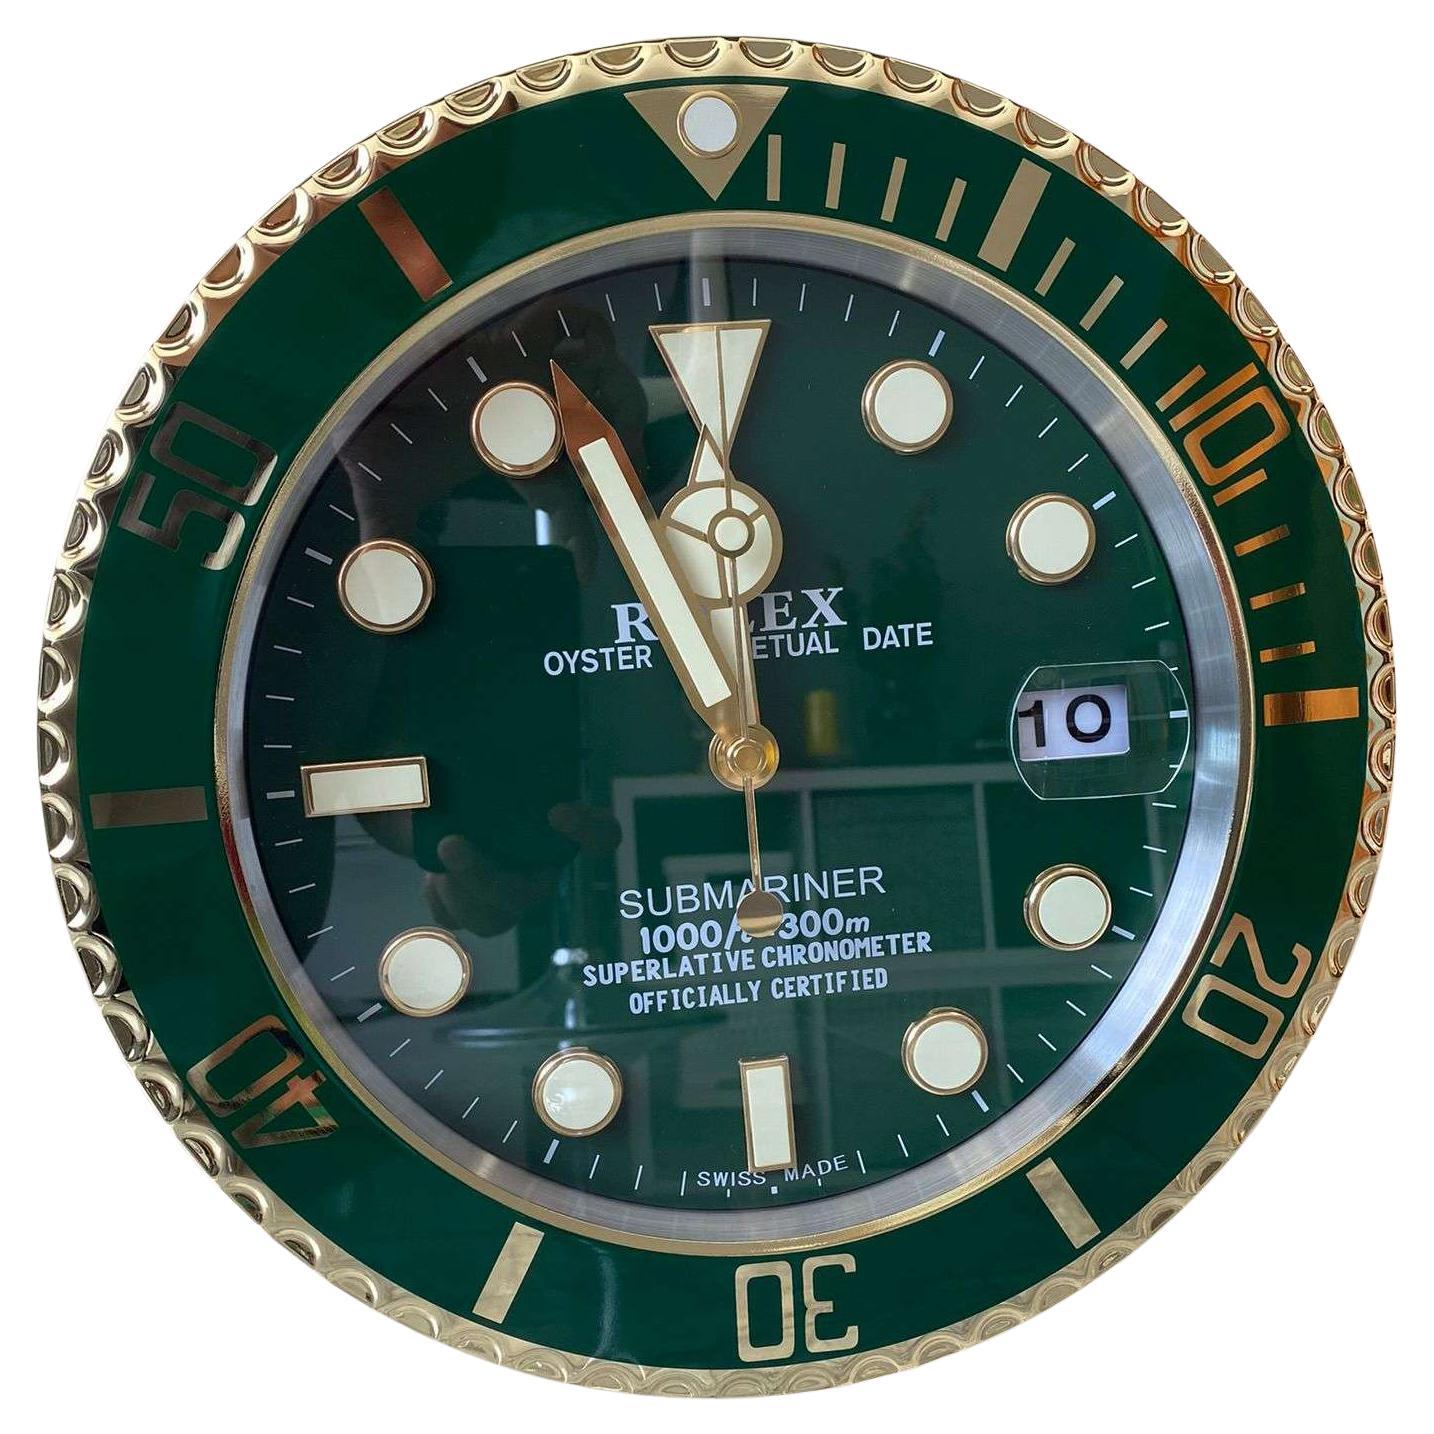 ROLEX Officially Certified Oyster Perpetual Gold & Green Submariner Wall Clock  For Sale